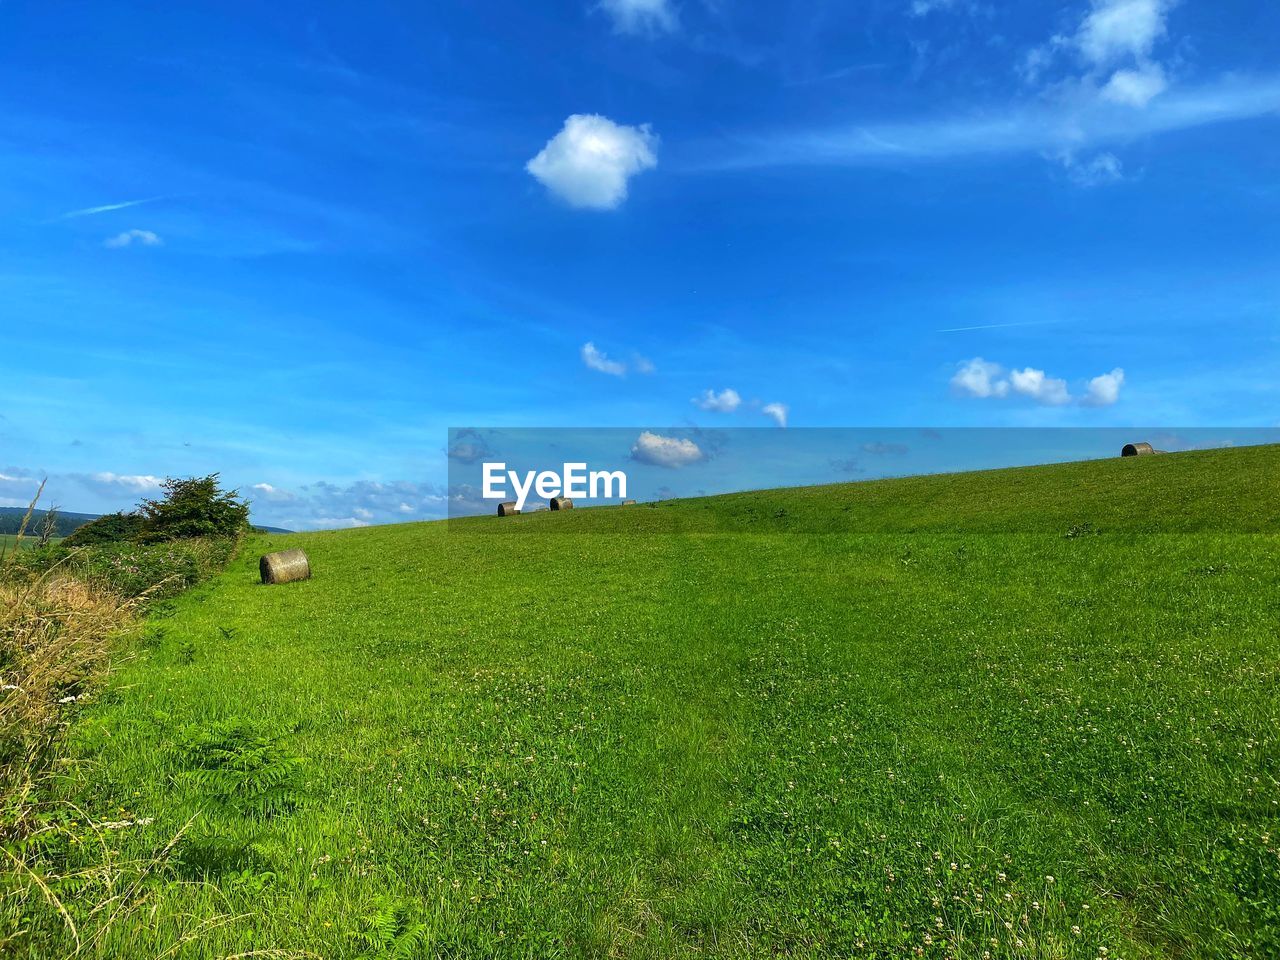 grassland, sky, grass, landscape, plant, environment, horizon, land, meadow, nature, pasture, green, field, scenics - nature, beauty in nature, hill, natural environment, cloud, plain, blue, prairie, tranquility, tranquil scene, rural scene, animal, day, rural area, sunlight, agriculture, no people, animal themes, non-urban scene, plateau, outdoors, mammal, lawn, steppe, travel destinations, travel, domestic animals, horizon over land, summer, growth, animal wildlife, grass area, tree, idyllic, tourism, environmental conservation, flower